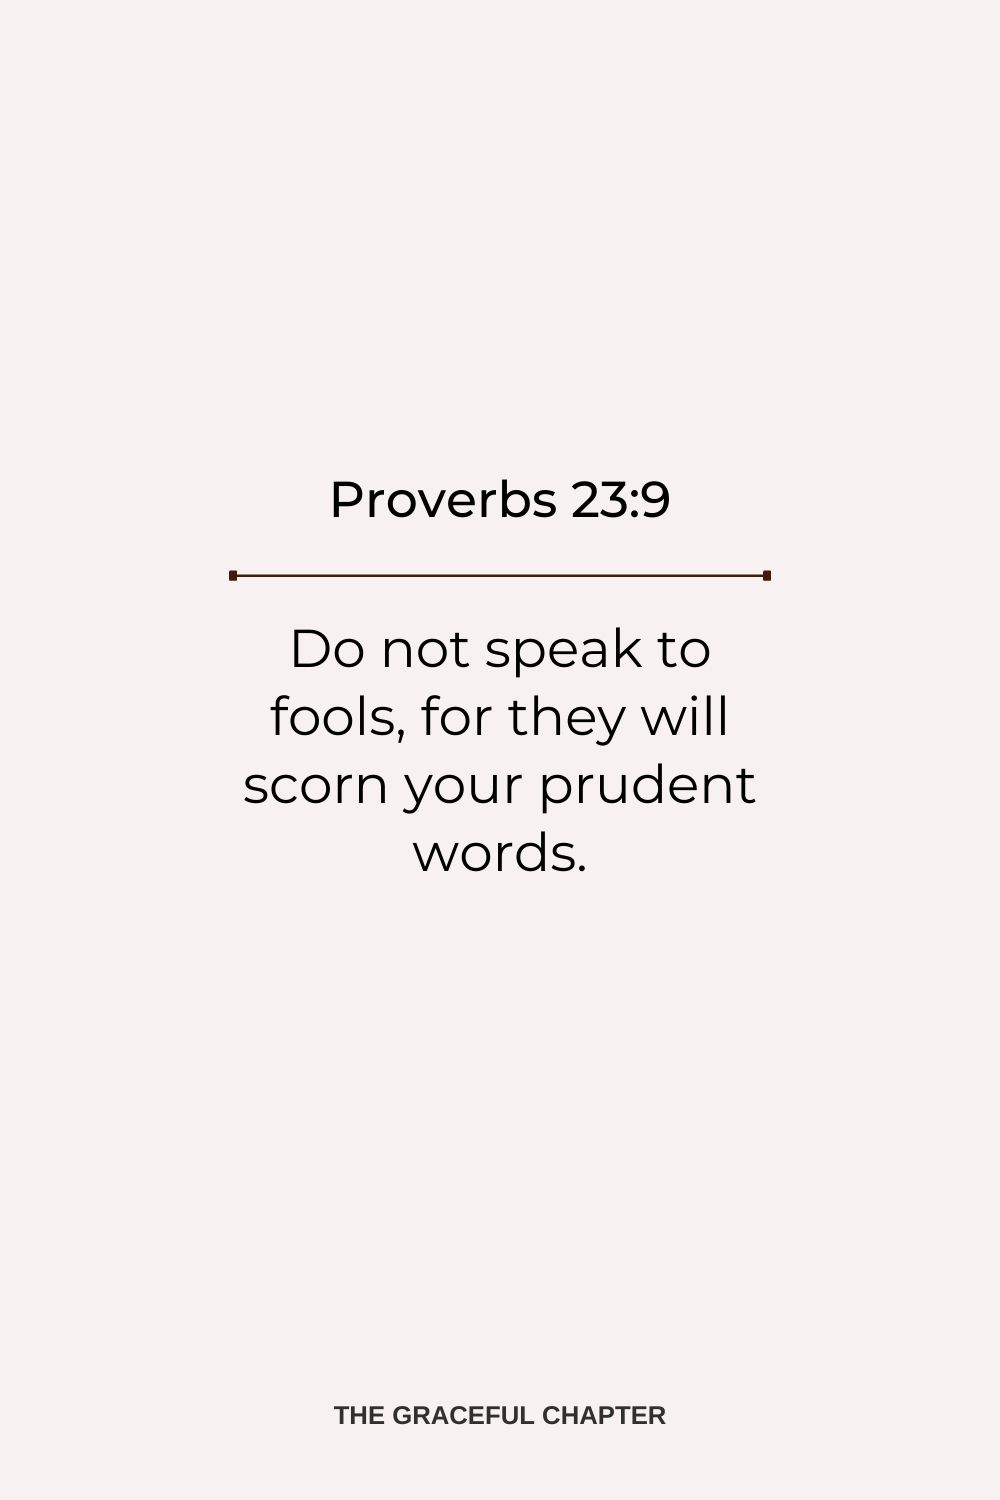 Do not speak to fools, for they will scorn your prudent words. Proverbs 23:9